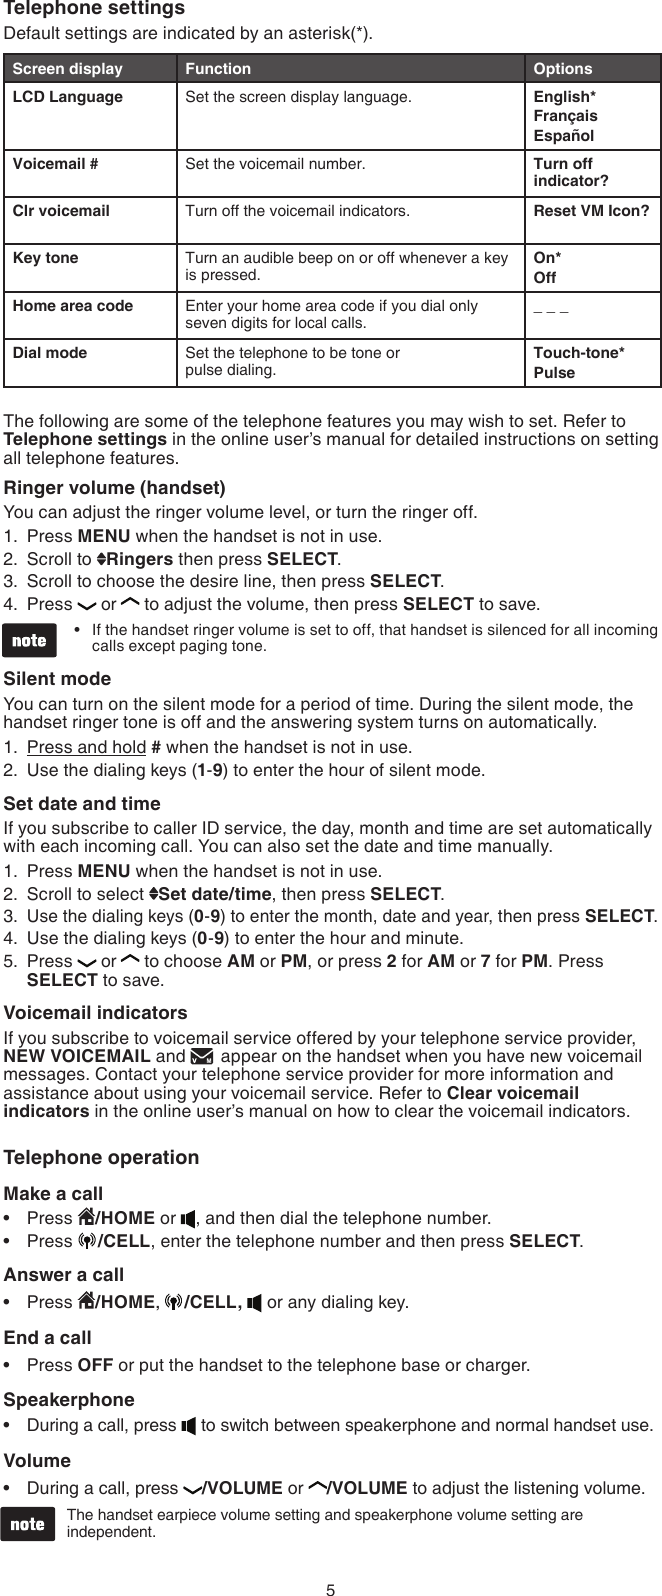 5Telephone settingsDefault settings are indicated by an asterisk(*).Screen display Function OptionsLCD Language Set the screen display language. English*FrançaisEspañolVoicemail # Set the voicemail number. Turn off indicator?Clr voicemail Turn off the voicemail indicators. Reset VM Icon?Key tone Turn an audible beep on or off whenever a key is pressed.On*OffHome area code Enter your home area code if you dial only seven digits for local calls._ _ _Dial mode Set the telephone to be tone or  pulse dialing.Touch-tone*PulseThe following are some of the telephone features you may wish to set. Refer to Telephone settings in the online user’s manual for detailed instructions on setting all telephone features.Ringer volume (handset)You can adjust the ringer volume level, or turn the ringer off.Press MENU when the handset is not in use.Scroll to  Ringers then press SELECT.Scroll to choose the desire line, then press SELECT.Press  or  to adjust the volume, then press SELECT to save.If the handset ringer volume is set to off, that handset is silenced for all incoming calls except paging tone.Silent modeYou can turn on the silent mode for a period of time. During the silent mode, the handset ringer tone is off and the answering system turns on automatically.Press and hold # when the handset is not in use.Use the dialing keys (1-9) to enter the hour of silent mode.Set date and timeIf you subscribe to caller ID service, the day, month and time are set automatically with each incoming call. You can also set the date and time manually.Press MENU when the handset is not in use.Scroll to select  Set date/time, then press SELECT.Use the dialing keys (0-9) to enter the month, date and year, then press SELECT.Use the dialing keys (0-9) to enter the hour and minute.Press  or  to choose AM or PM, or press 2 for AM or 7 for PM. Press SELECT to save. Voicemail indicatorsIf you subscribe to voicemail service offered by your telephone service provider, NEW VOICEMAIL and   appear on the handset when you have new voicemail messages. Contact your telephone service provider for more information and assistance about using your voicemail service. Refer to Clear voicemail indicators in the online user’s manual on how to clear the voicemail indicators.Telephone operationMake a callPress  /HOME or  , and then dial the telephone number.Press  /CELL, enter the telephone number and then press SELECT.Answer a callPress  /HOME,  /CELL,   or any dialing key.End a callPress OFF or put the handset to the telephone base or charger.SpeakerphoneDuring a call, press   to switch between speakerphone and normal handset use.VolumeDuring a call, press  /VOLUME or  /VOLUME to adjust the listening volume.The handset earpiece volume setting and speakerphone volume setting are independent.1.2.3.4.•1.2.1.2.3.4.5.••••••